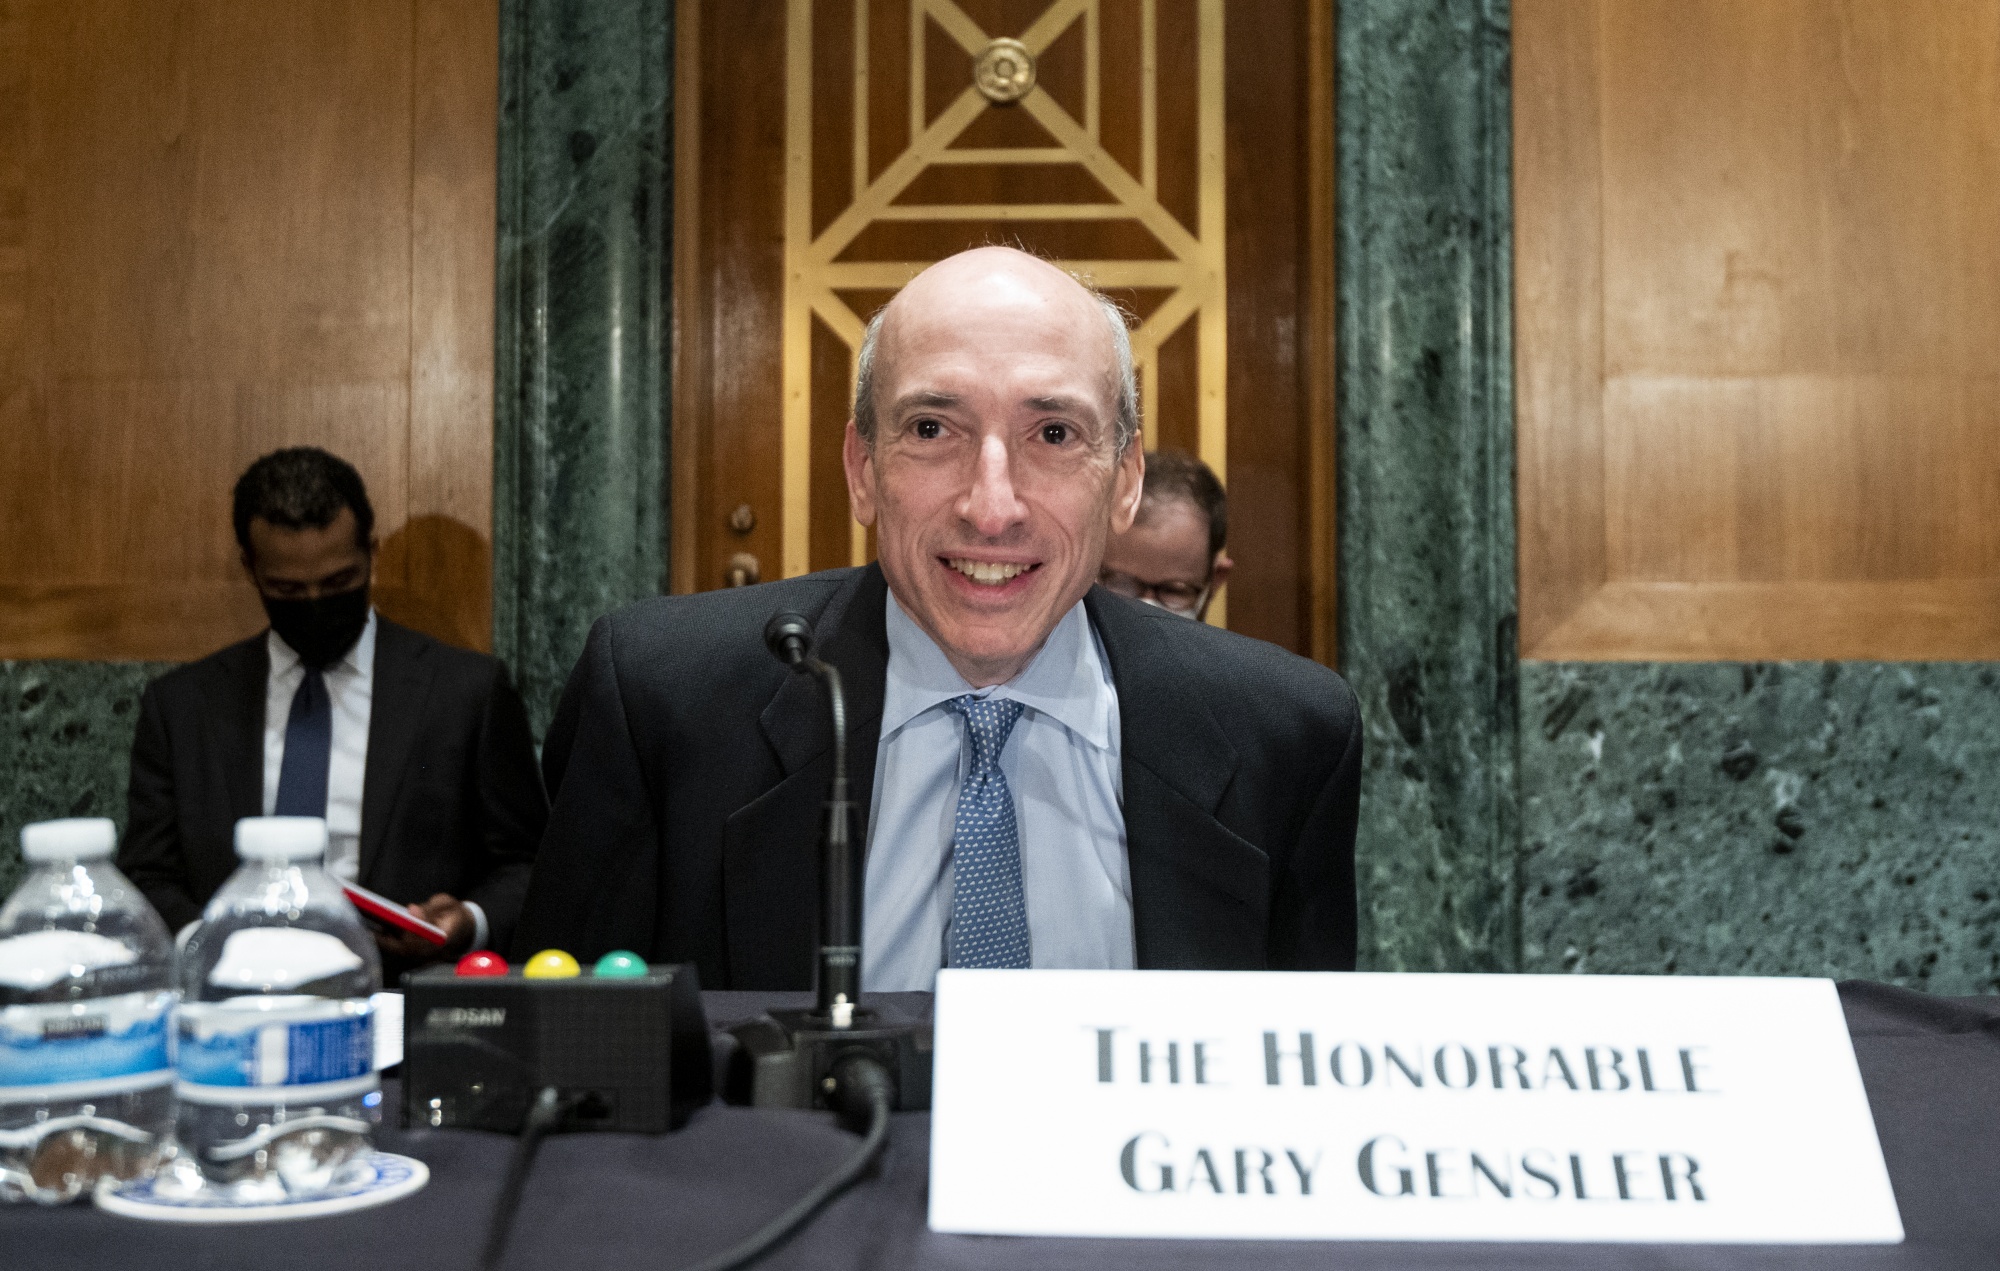 SEC Chair&nbsp;Gary Gensler wants to find ways to “bring greater efficiency and transparency” to trading debt.